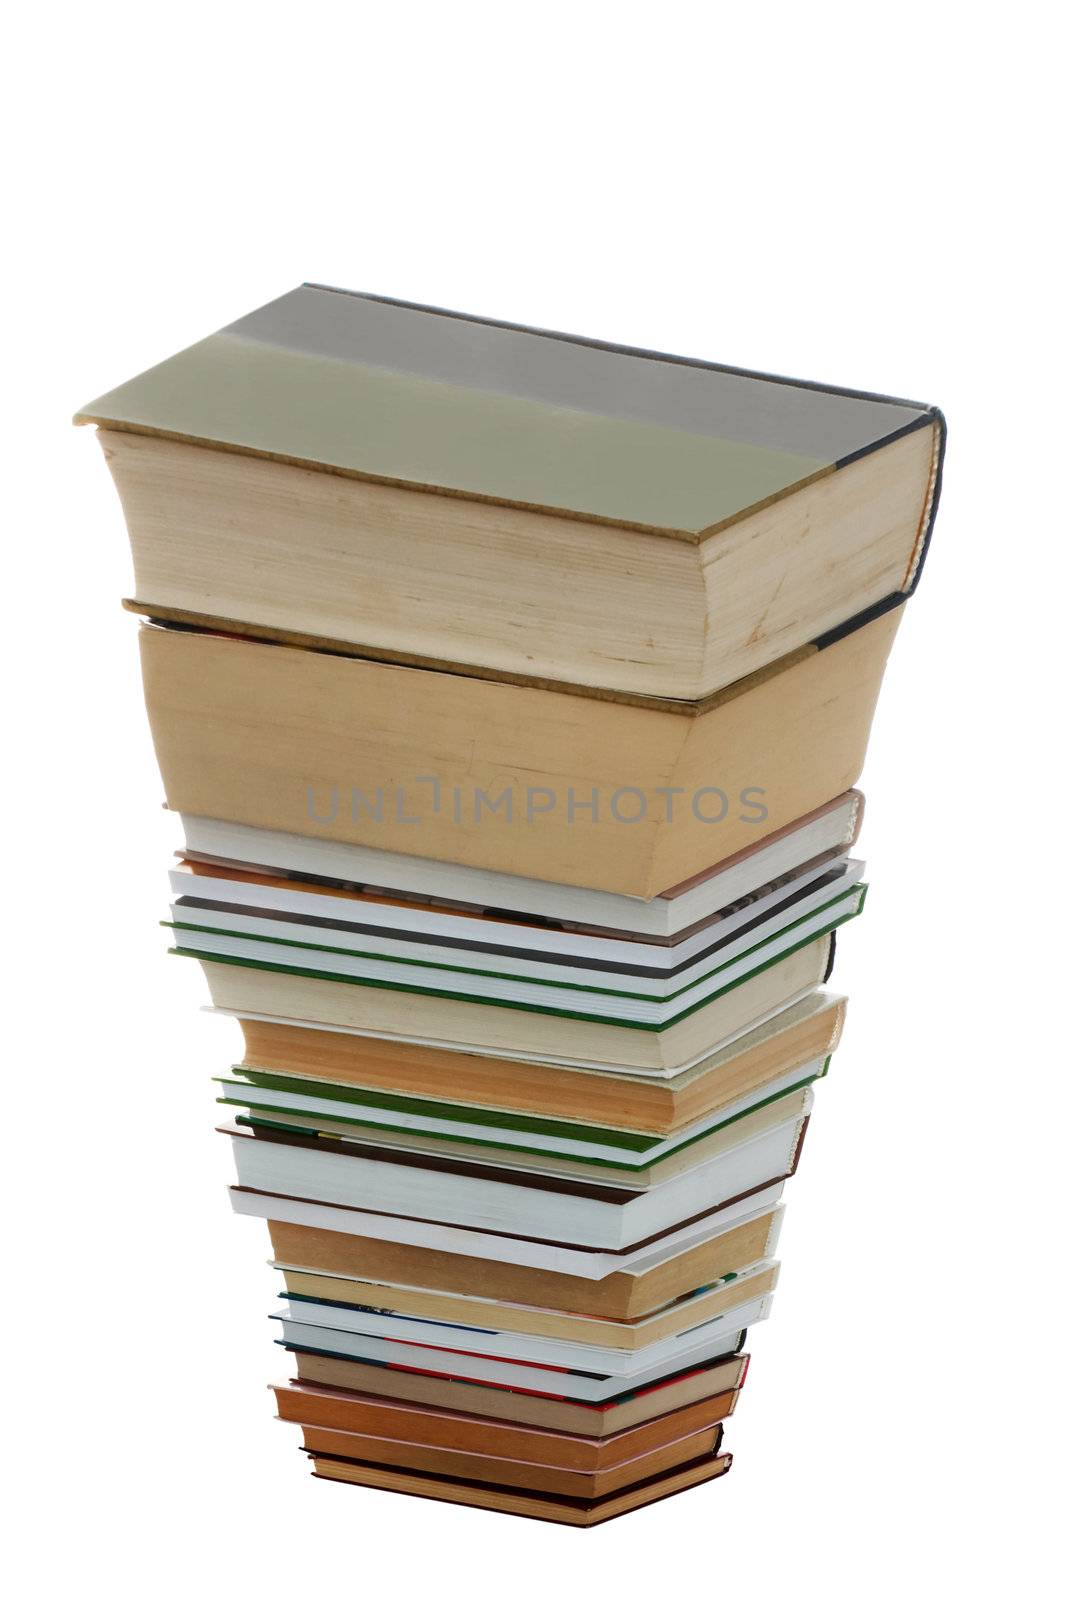 An image of many books